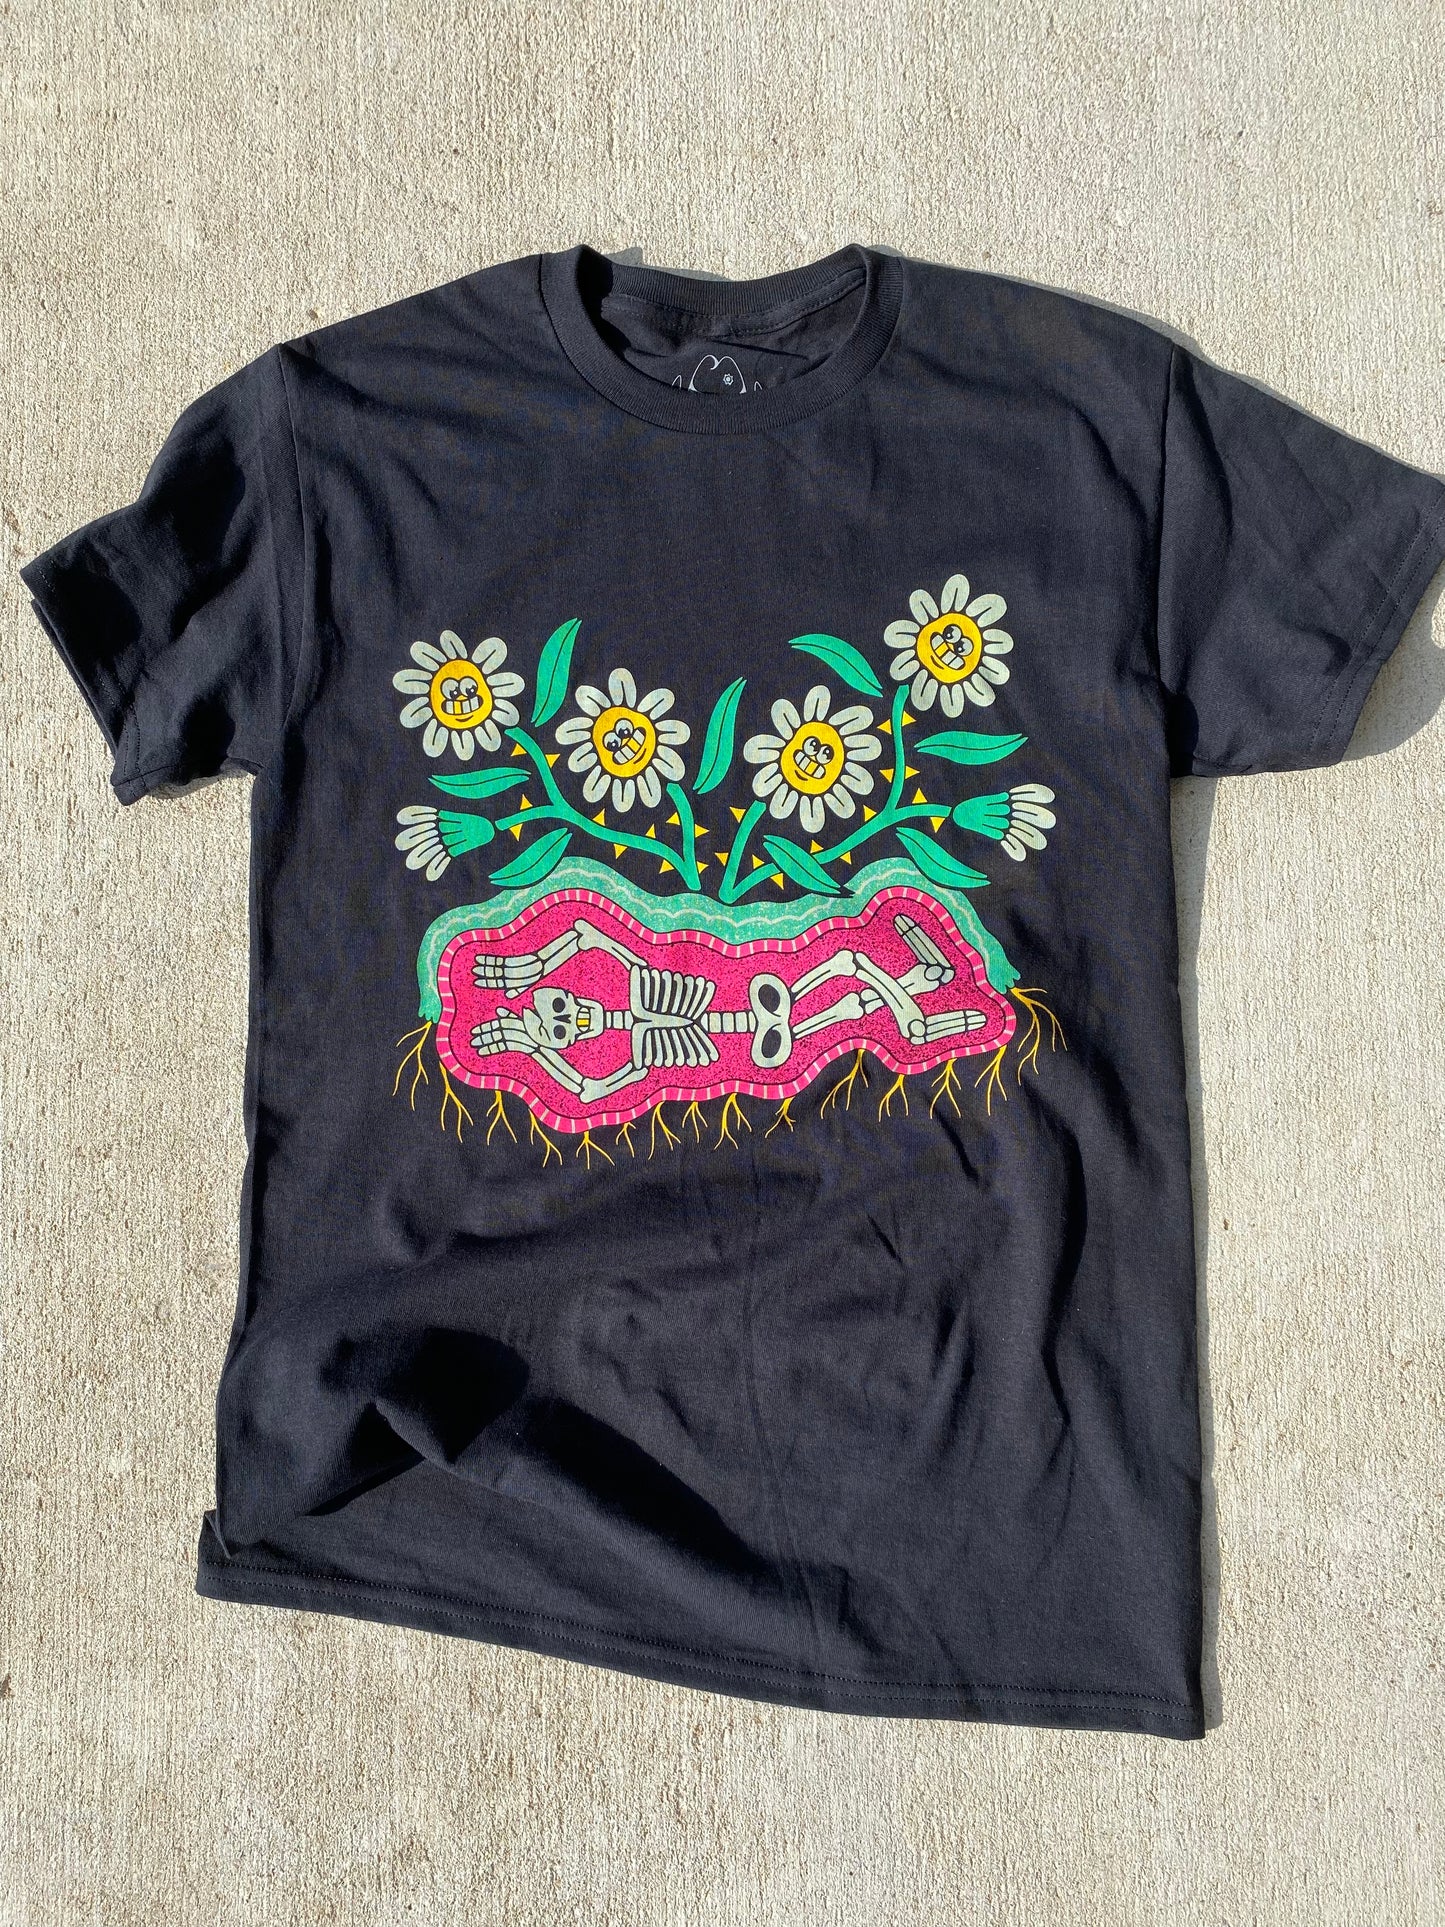 Black short sleeve t-shirt with 6 cartoon flowers with white petals and smiling faces. Below the flowers is a skeleton laying down in pink dirt and roots growing out of the bottom.